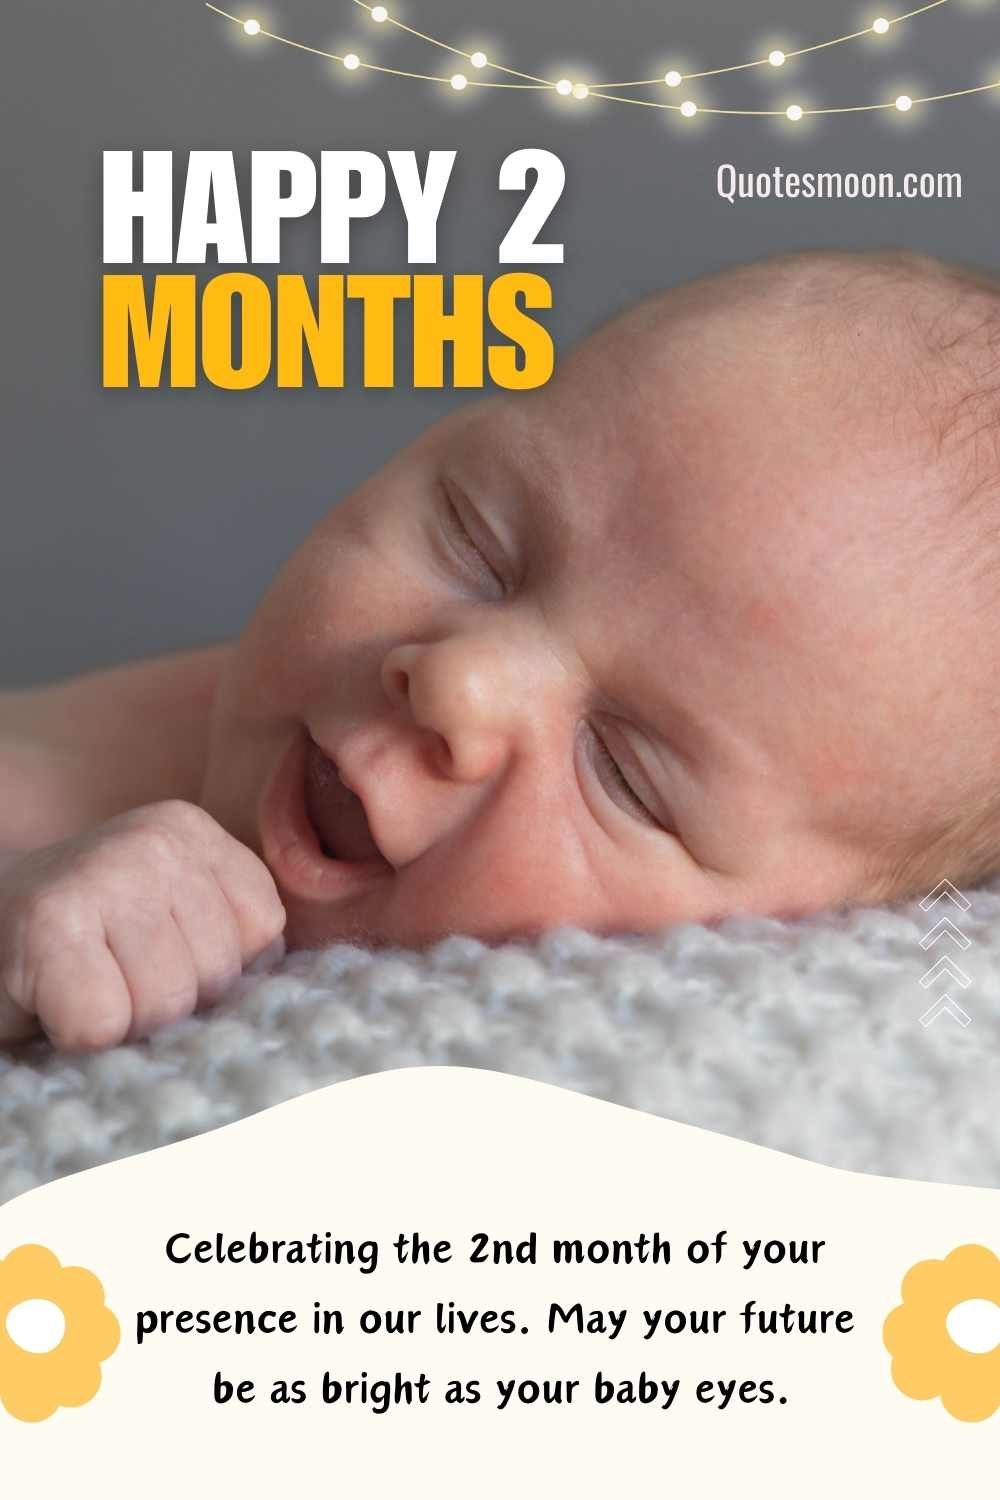 Birthday Wishes And Prayers For 2 Month Old Baby Boy